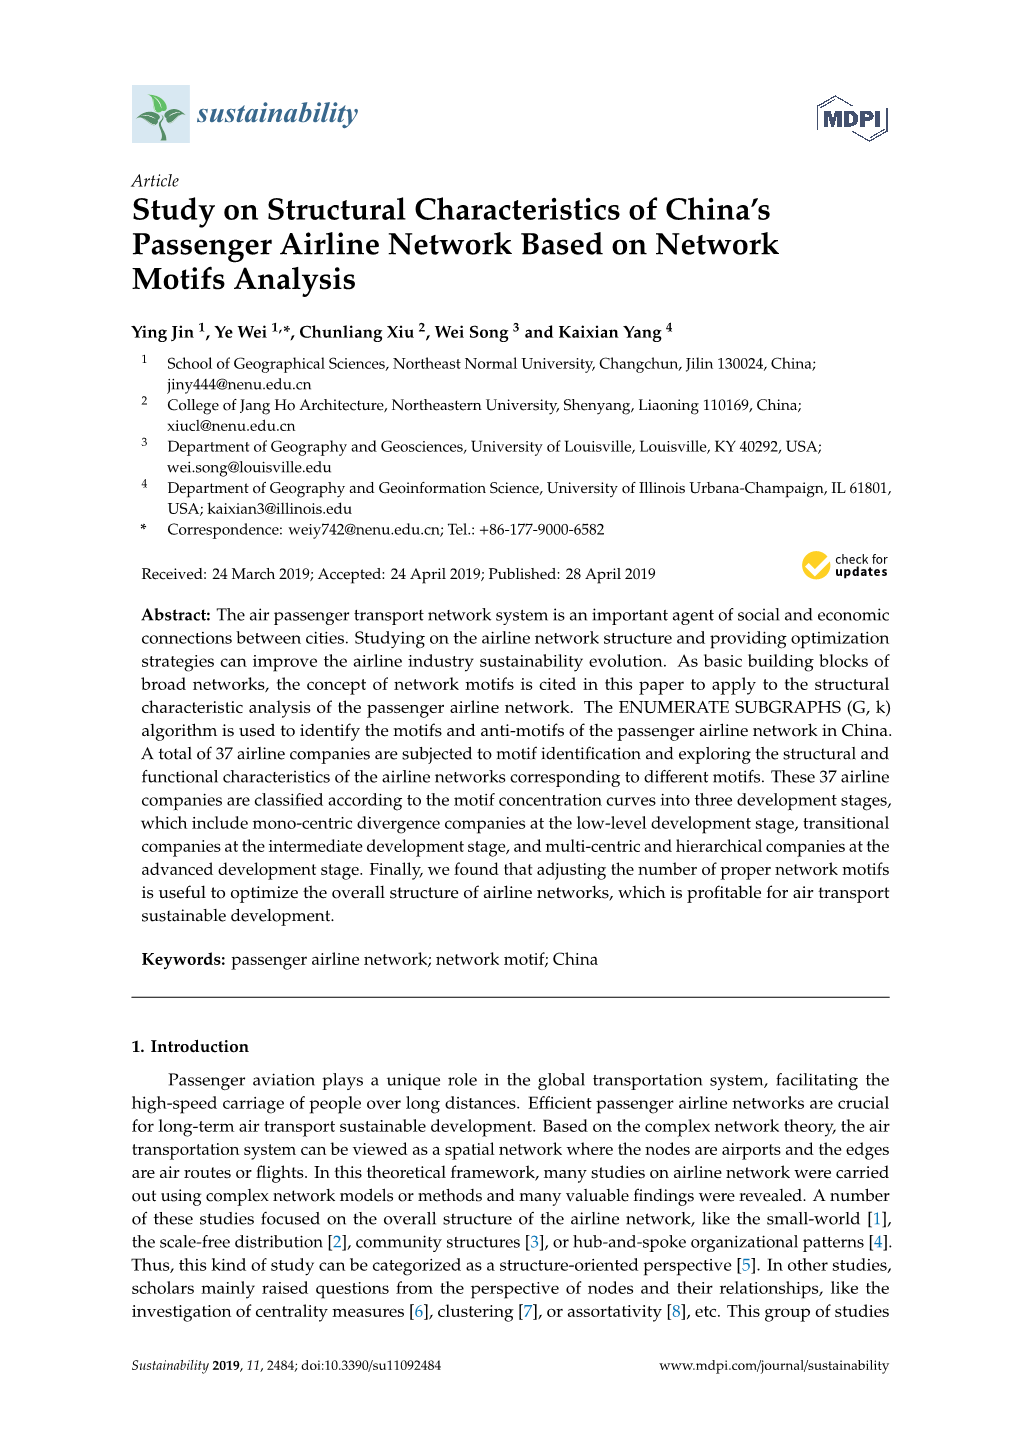 Study on Structural Characteristics of China's Passenger Airline Network